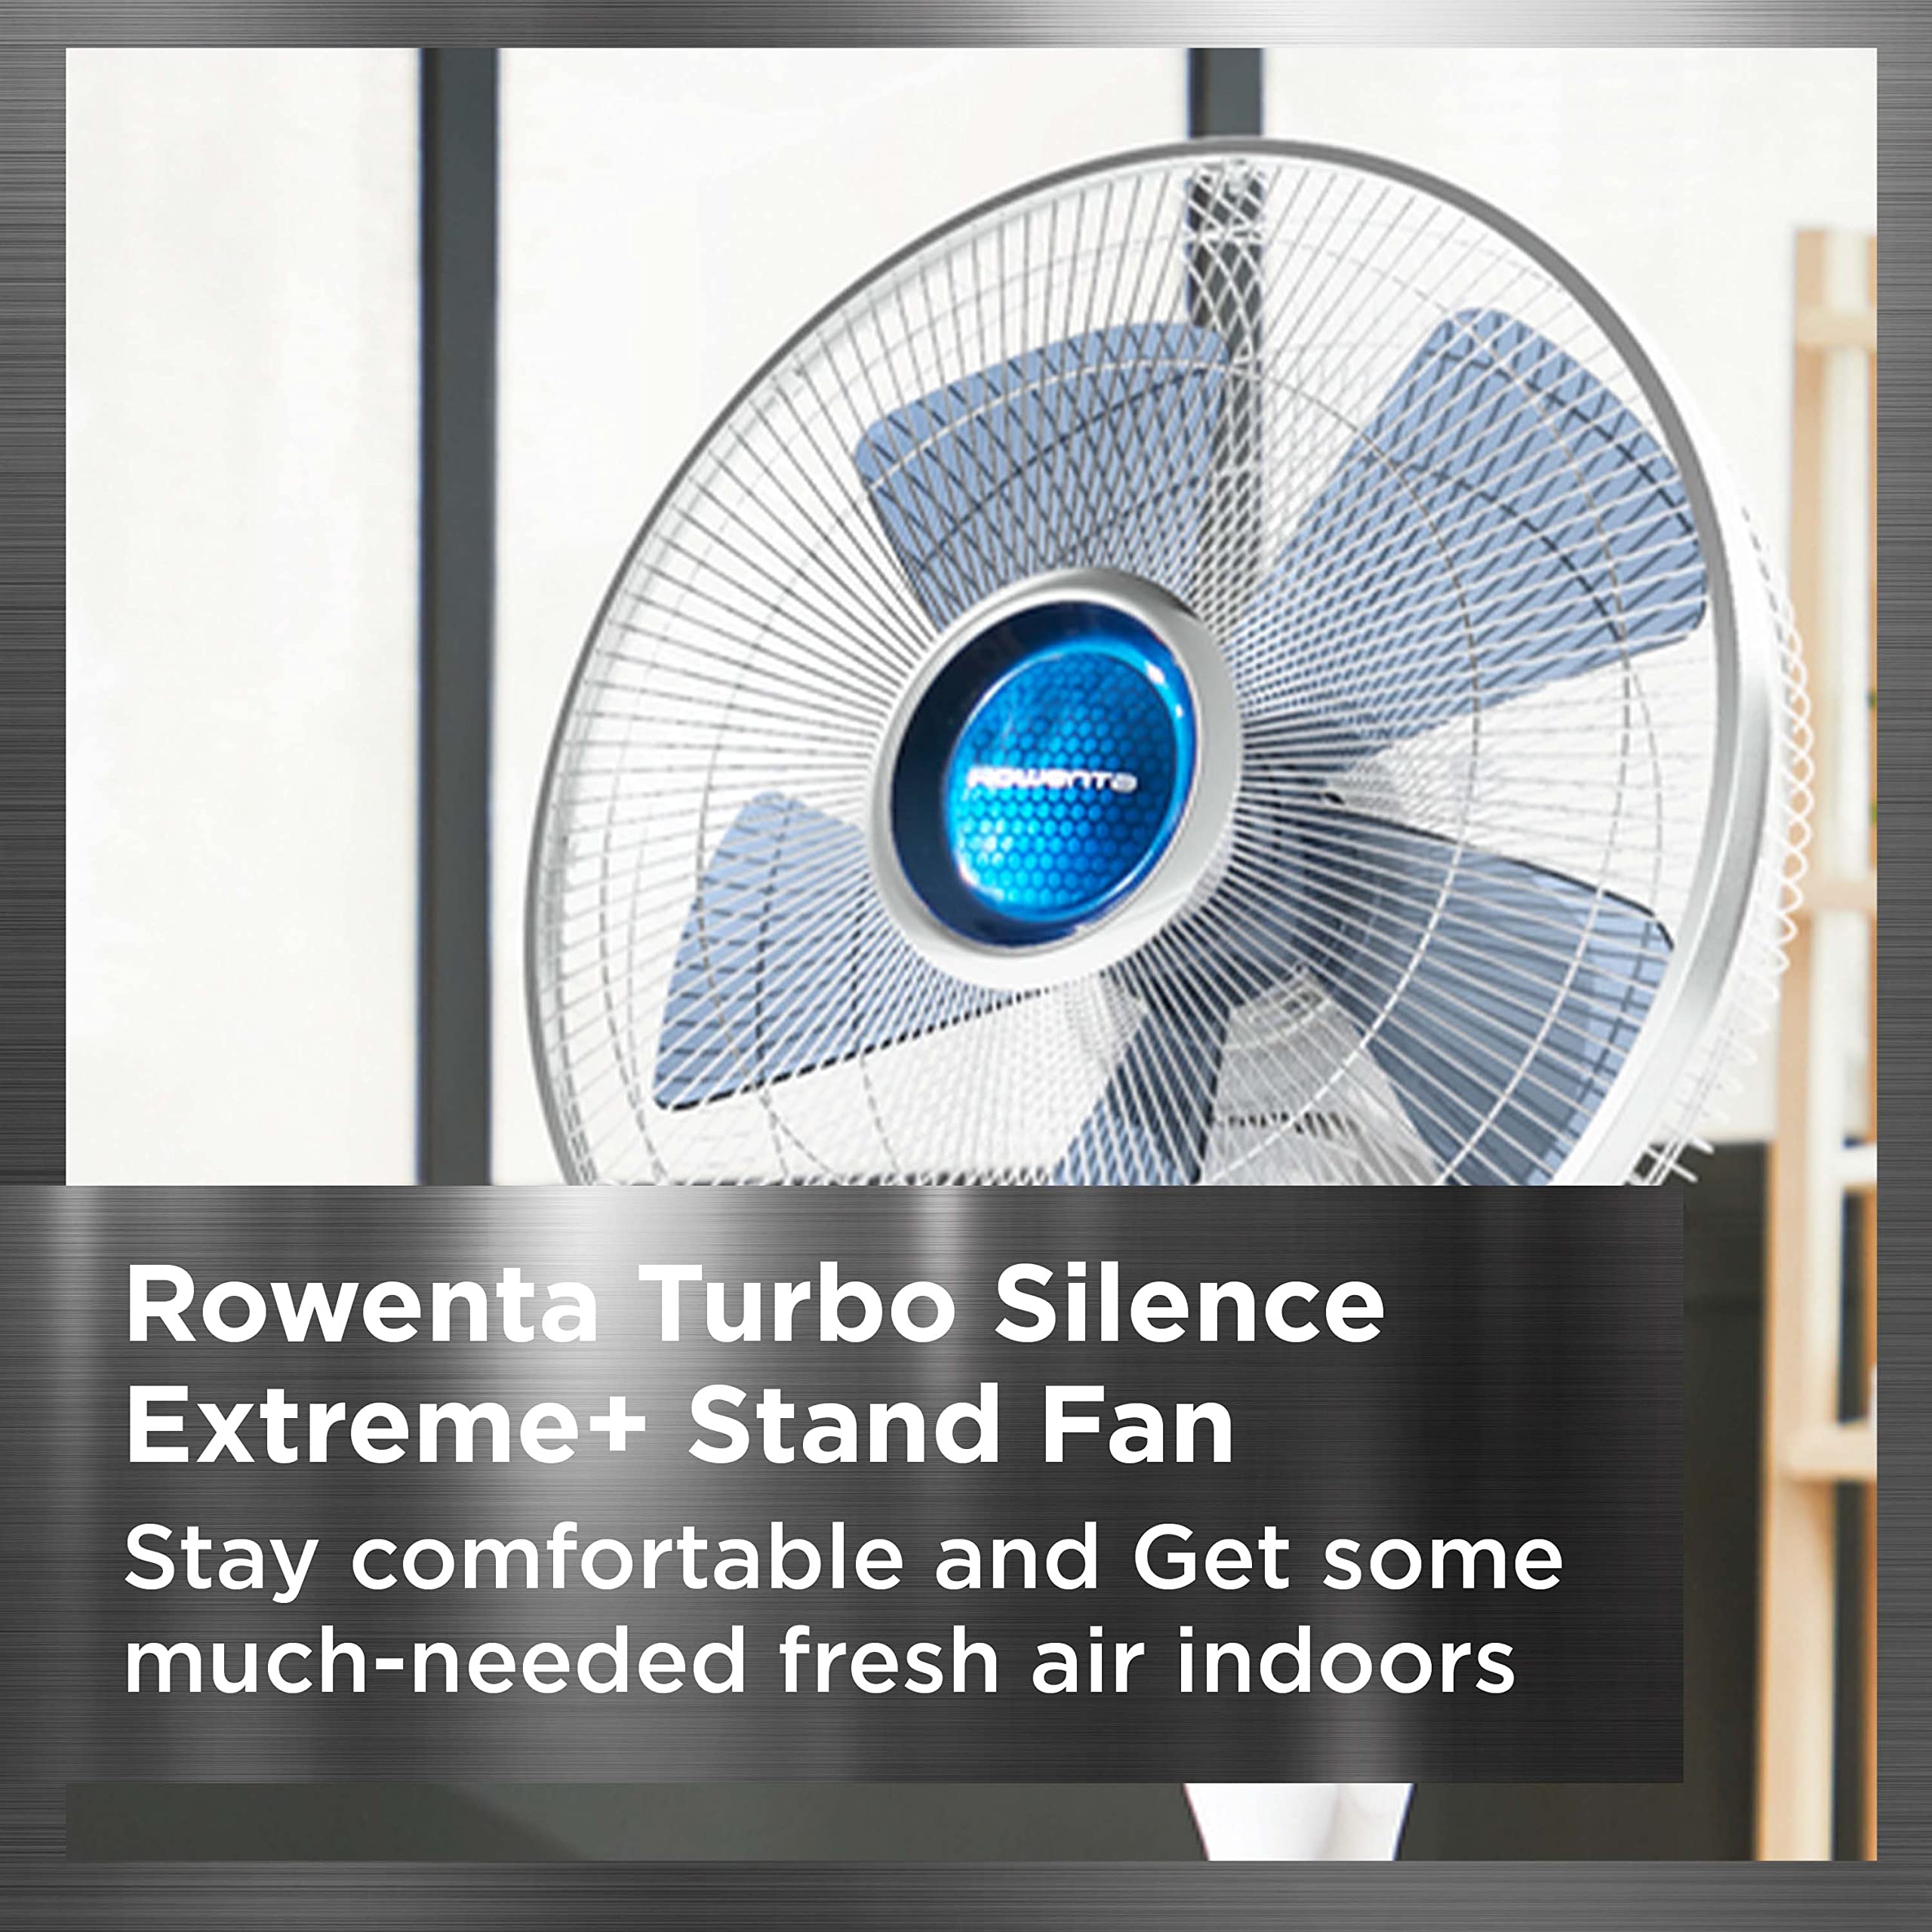 Rowenta Turbo Silence Standing Floor Fan with Remote 53 Inches Ultra Quiet Fan Oscillating, Portable, 5 Speeds, Indoor, Refresh Up to 23-Feet VU5870,White